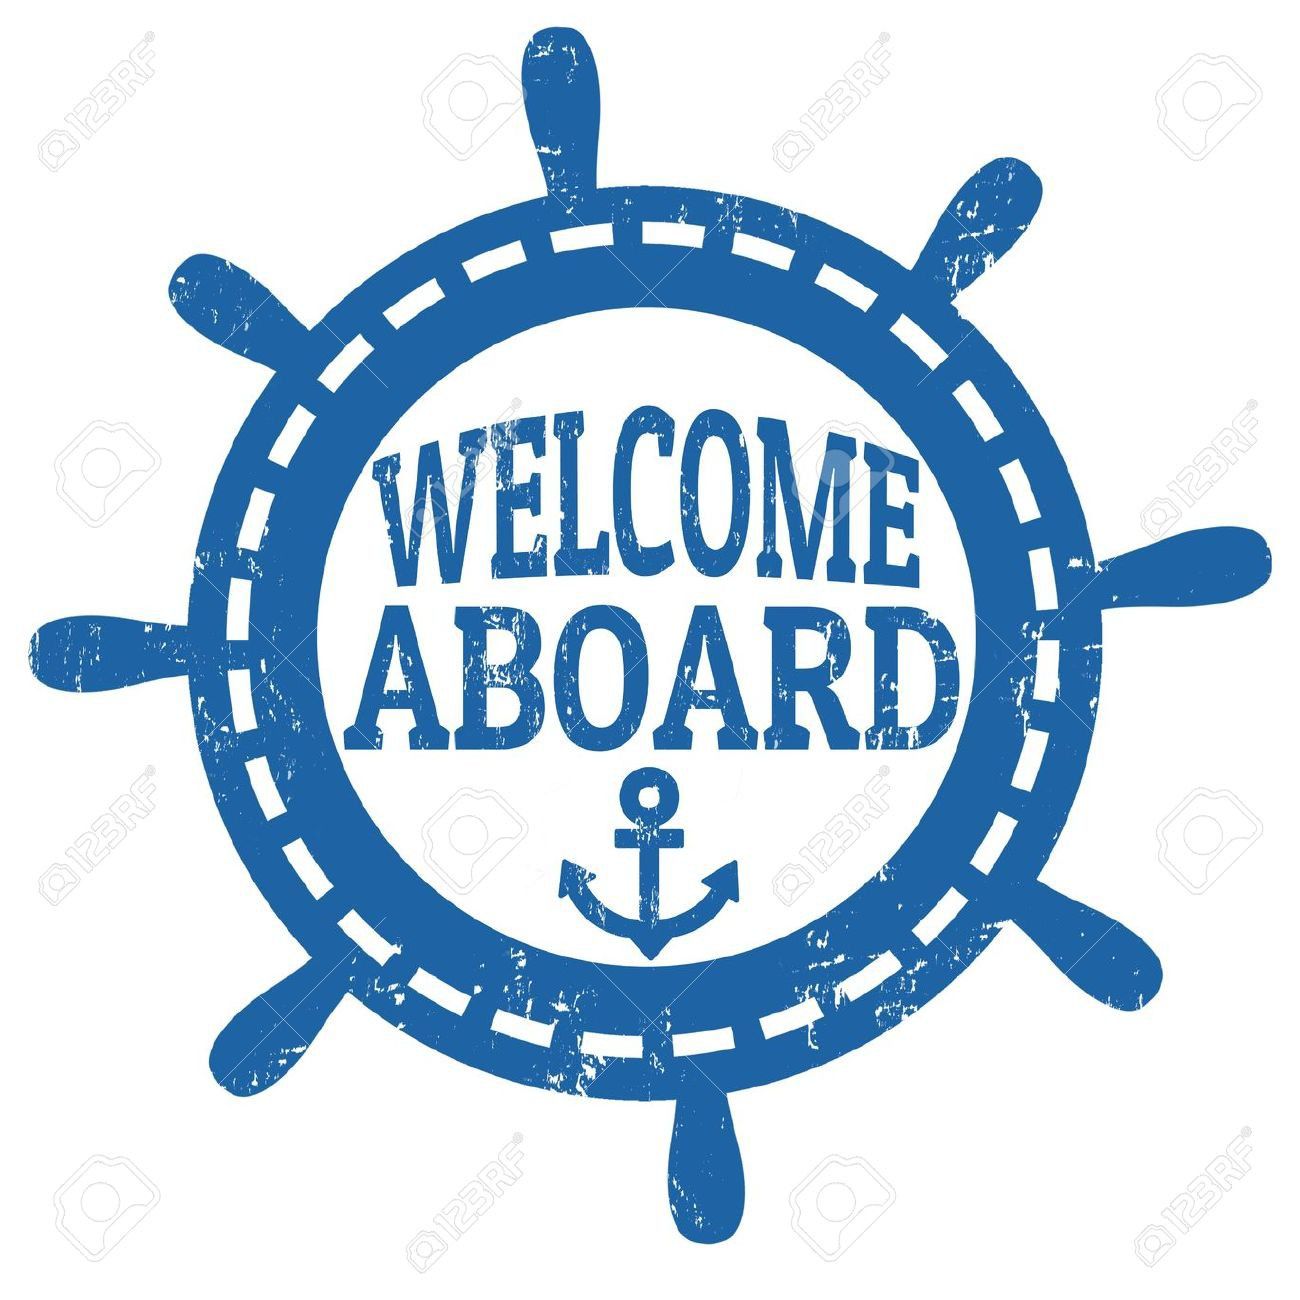 nautical clipart welcome aboard